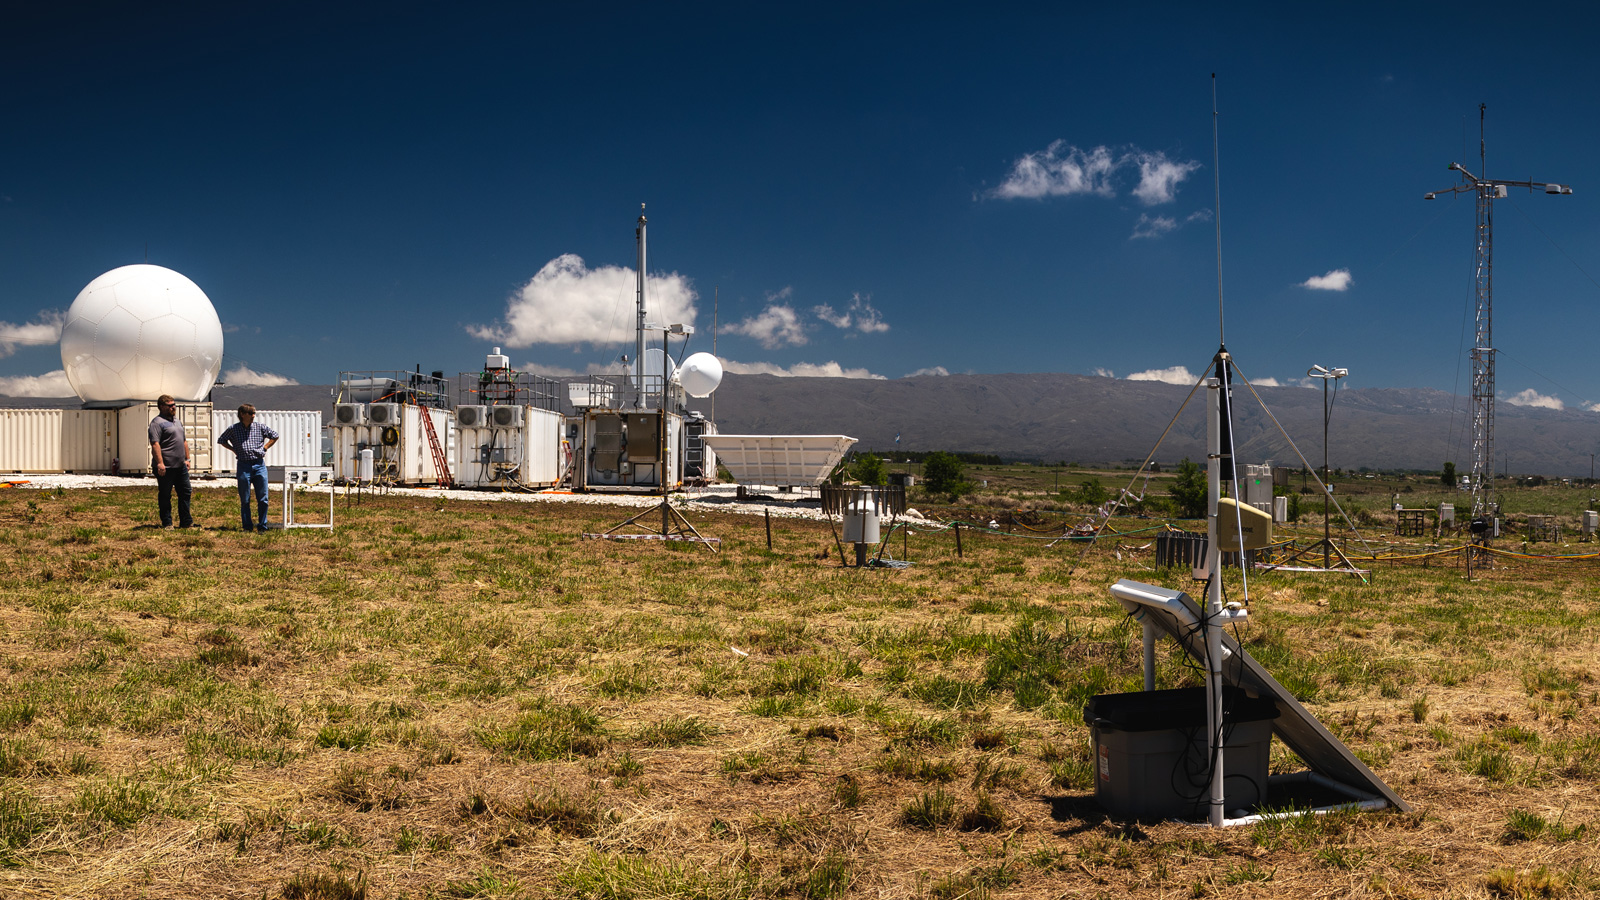 The ARM Climate Research Facility (Image courtesy of the U.S. Department of Energy Atmospheric Radiation Measurement (ARM) Research Facility, Jason Tomlinson.)